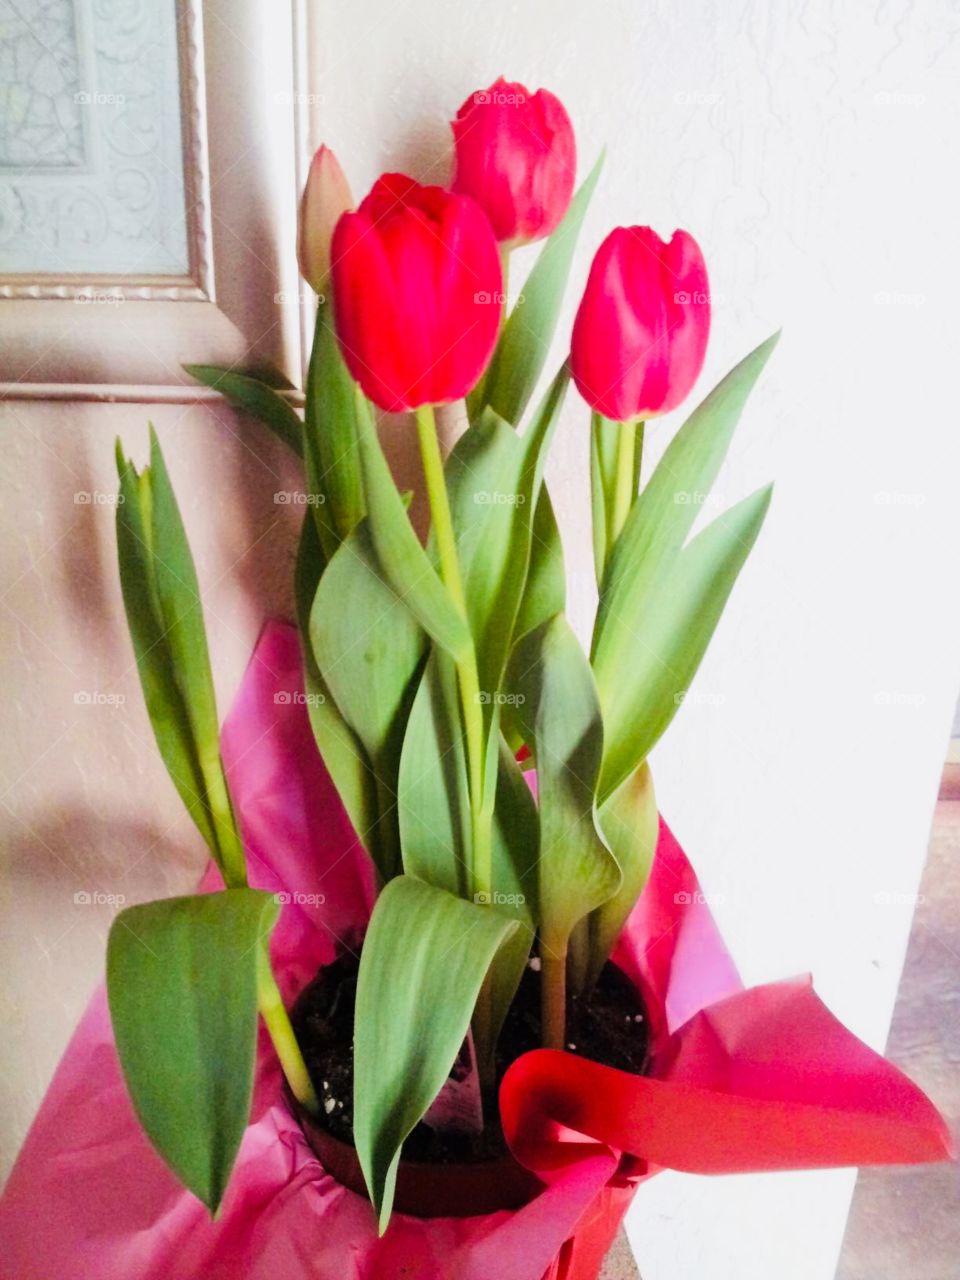 Tulip flowers given to me from my dad! #daddysgirl 